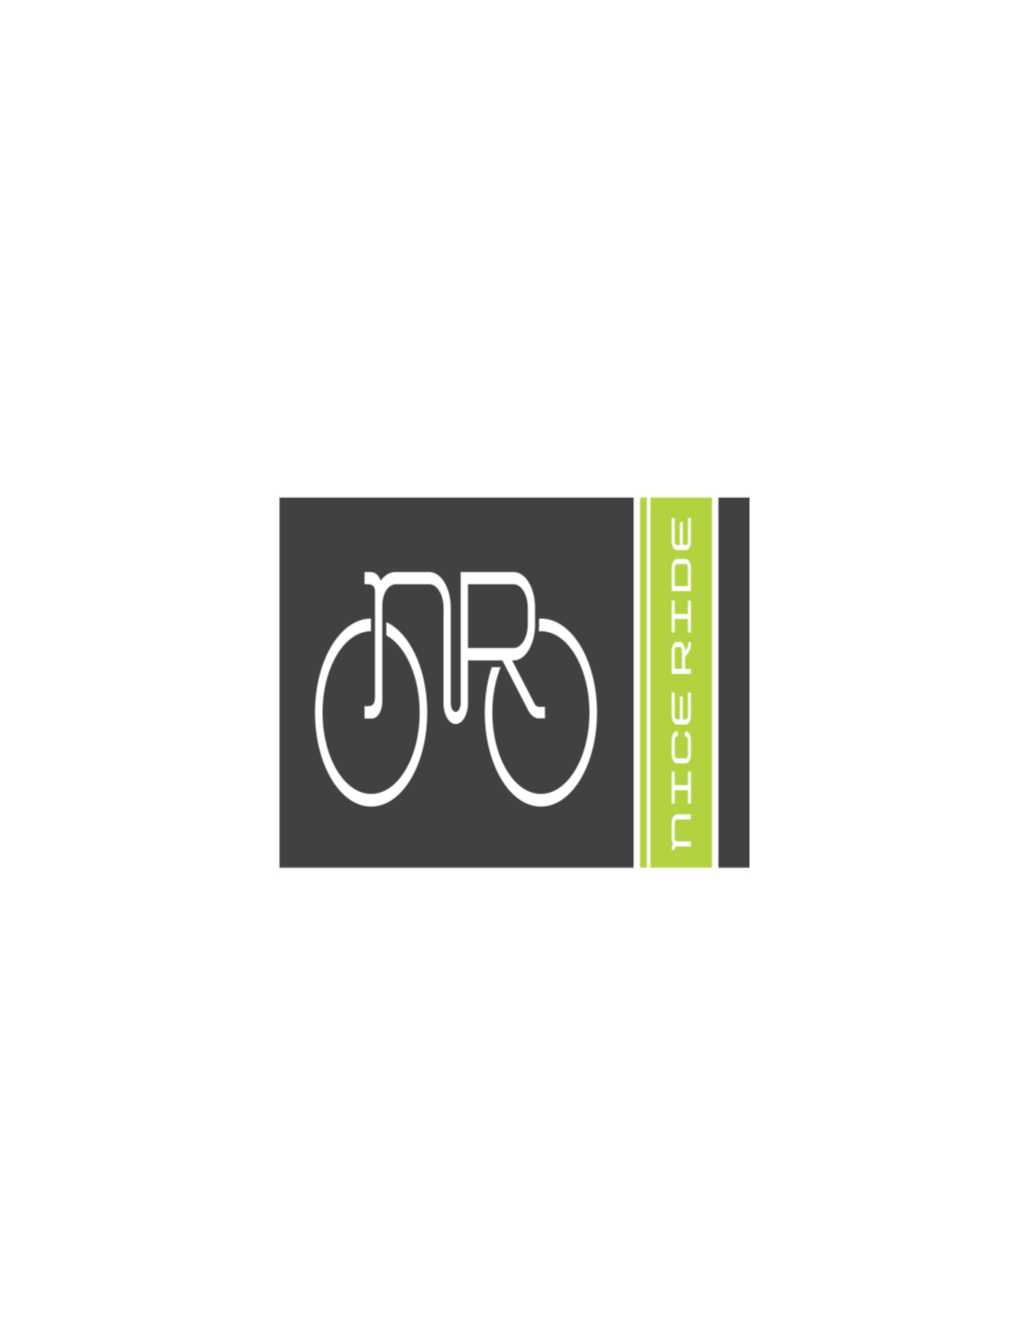 Non‐Profit Business Plan for Twin Cities Bike Share System